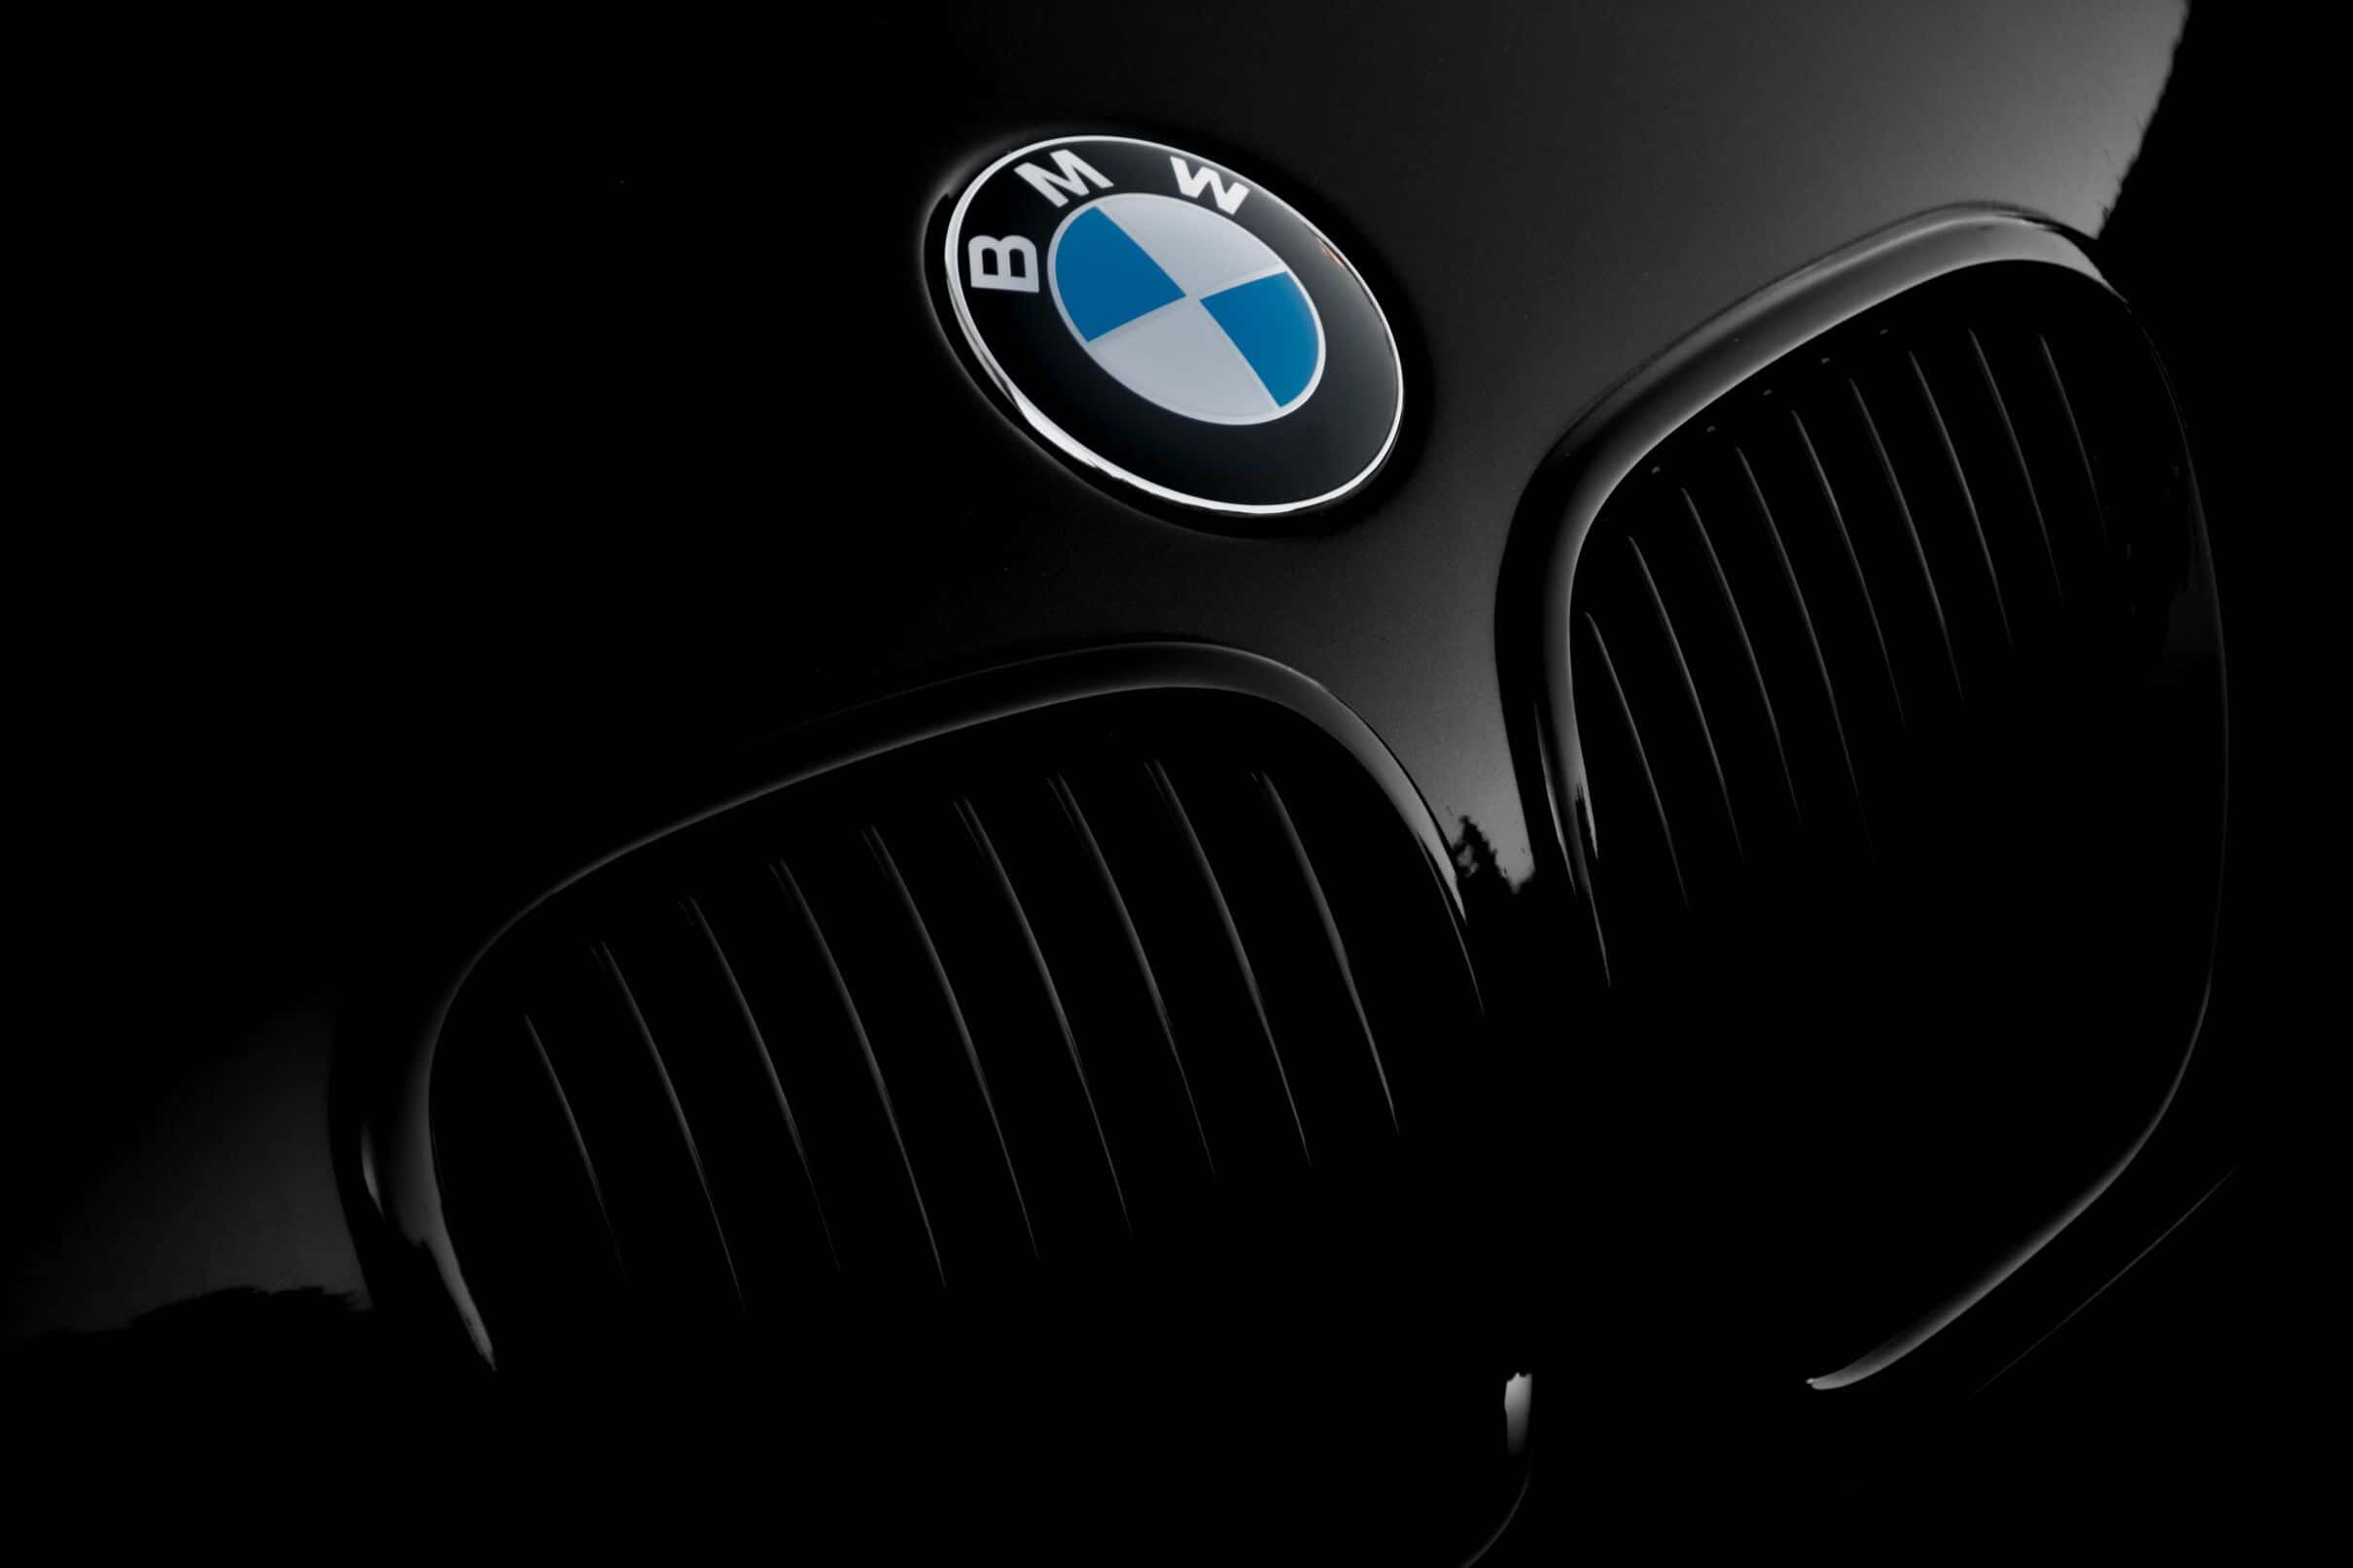 Close-up view of iconic BMW badge with sleek design and signature blue and white colors.